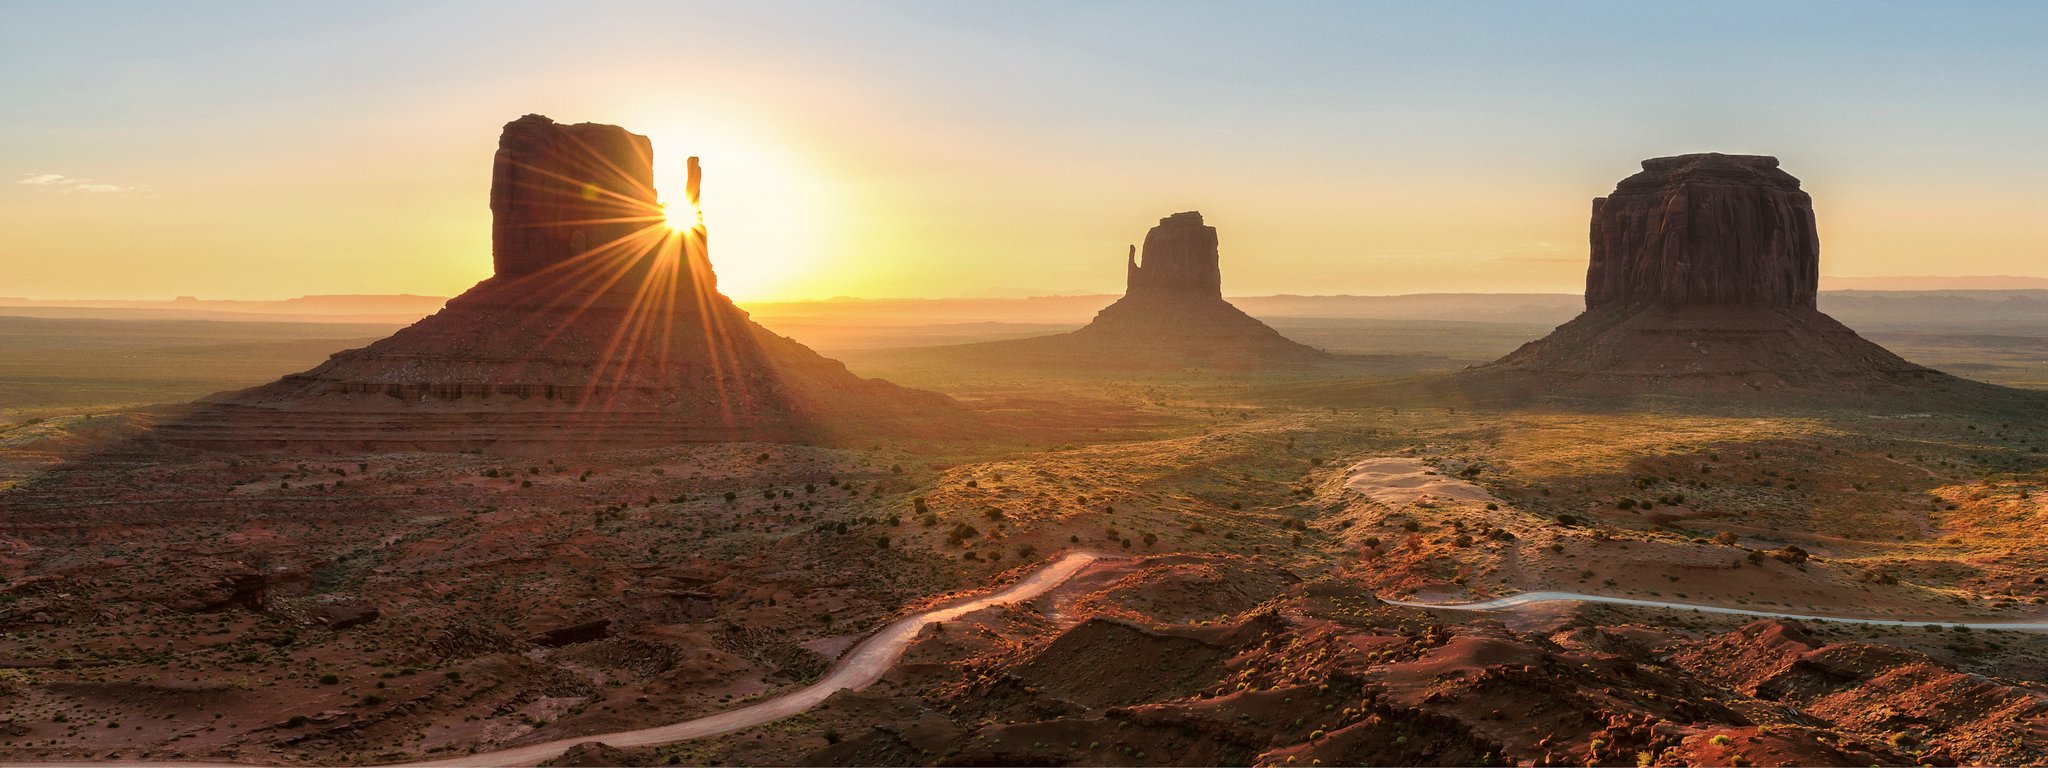 Classic MONUMENT VALLEY DRIVE